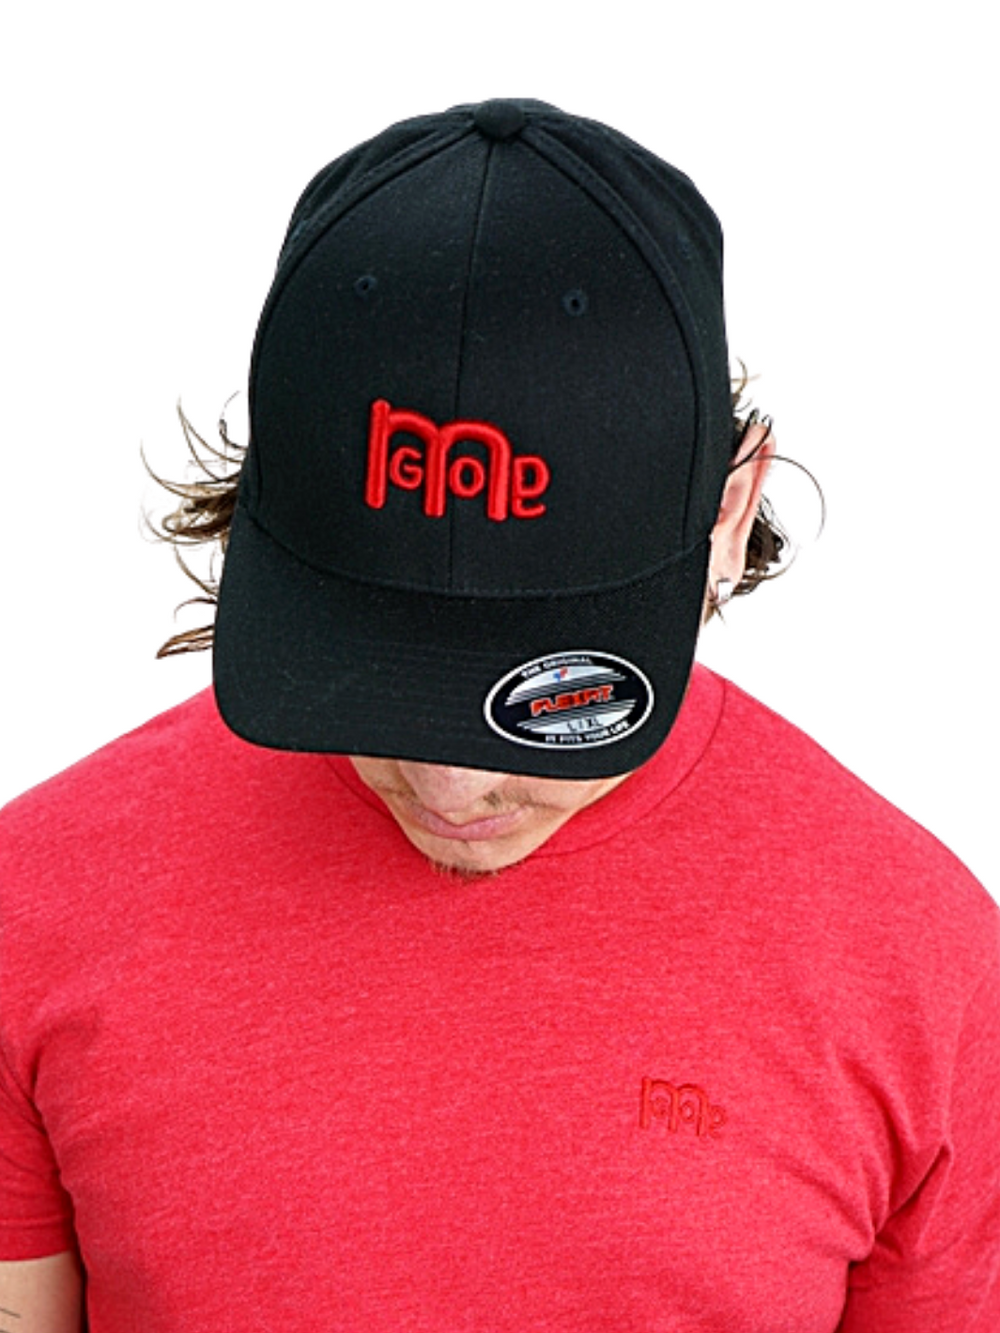 Smooth and sleek Black 6 panel Fitted Hat has curved Silver under visor with puff style GODinme logo embroidered in Red on front and flat style GODinme name embroidered on back.